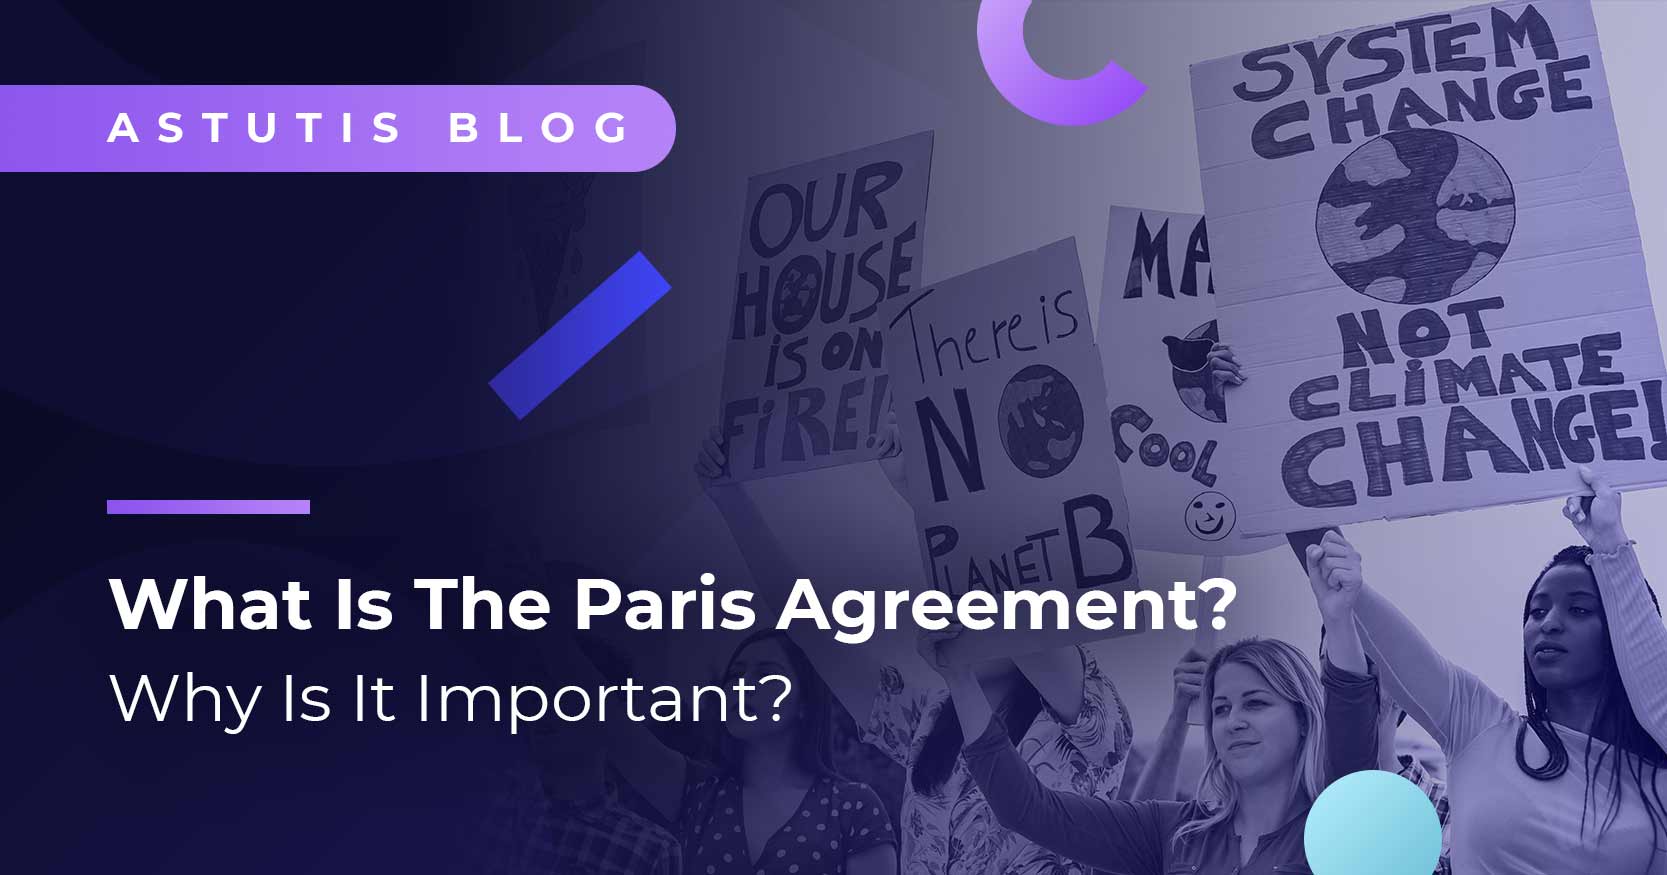 What Is the Paris Agreement? And Why Is It Important? Image